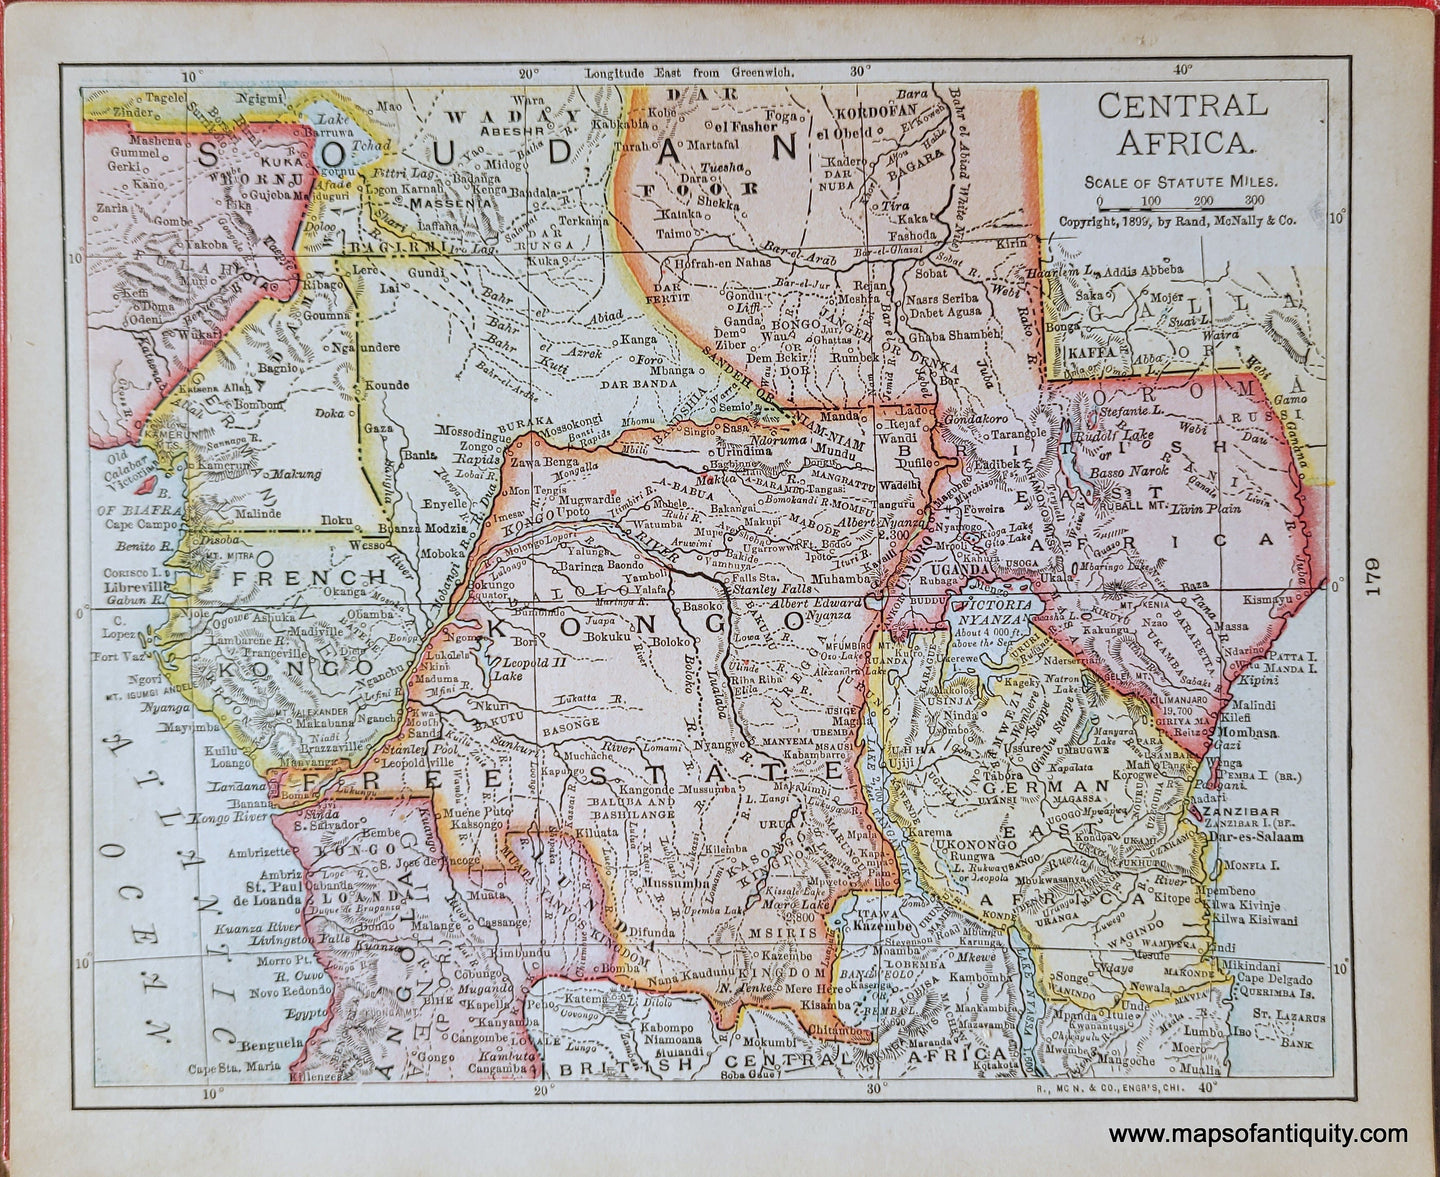 Genuine-Antique-Map-Central-Africa-1900-Rand-McNally-Maps-Of-Antiquity